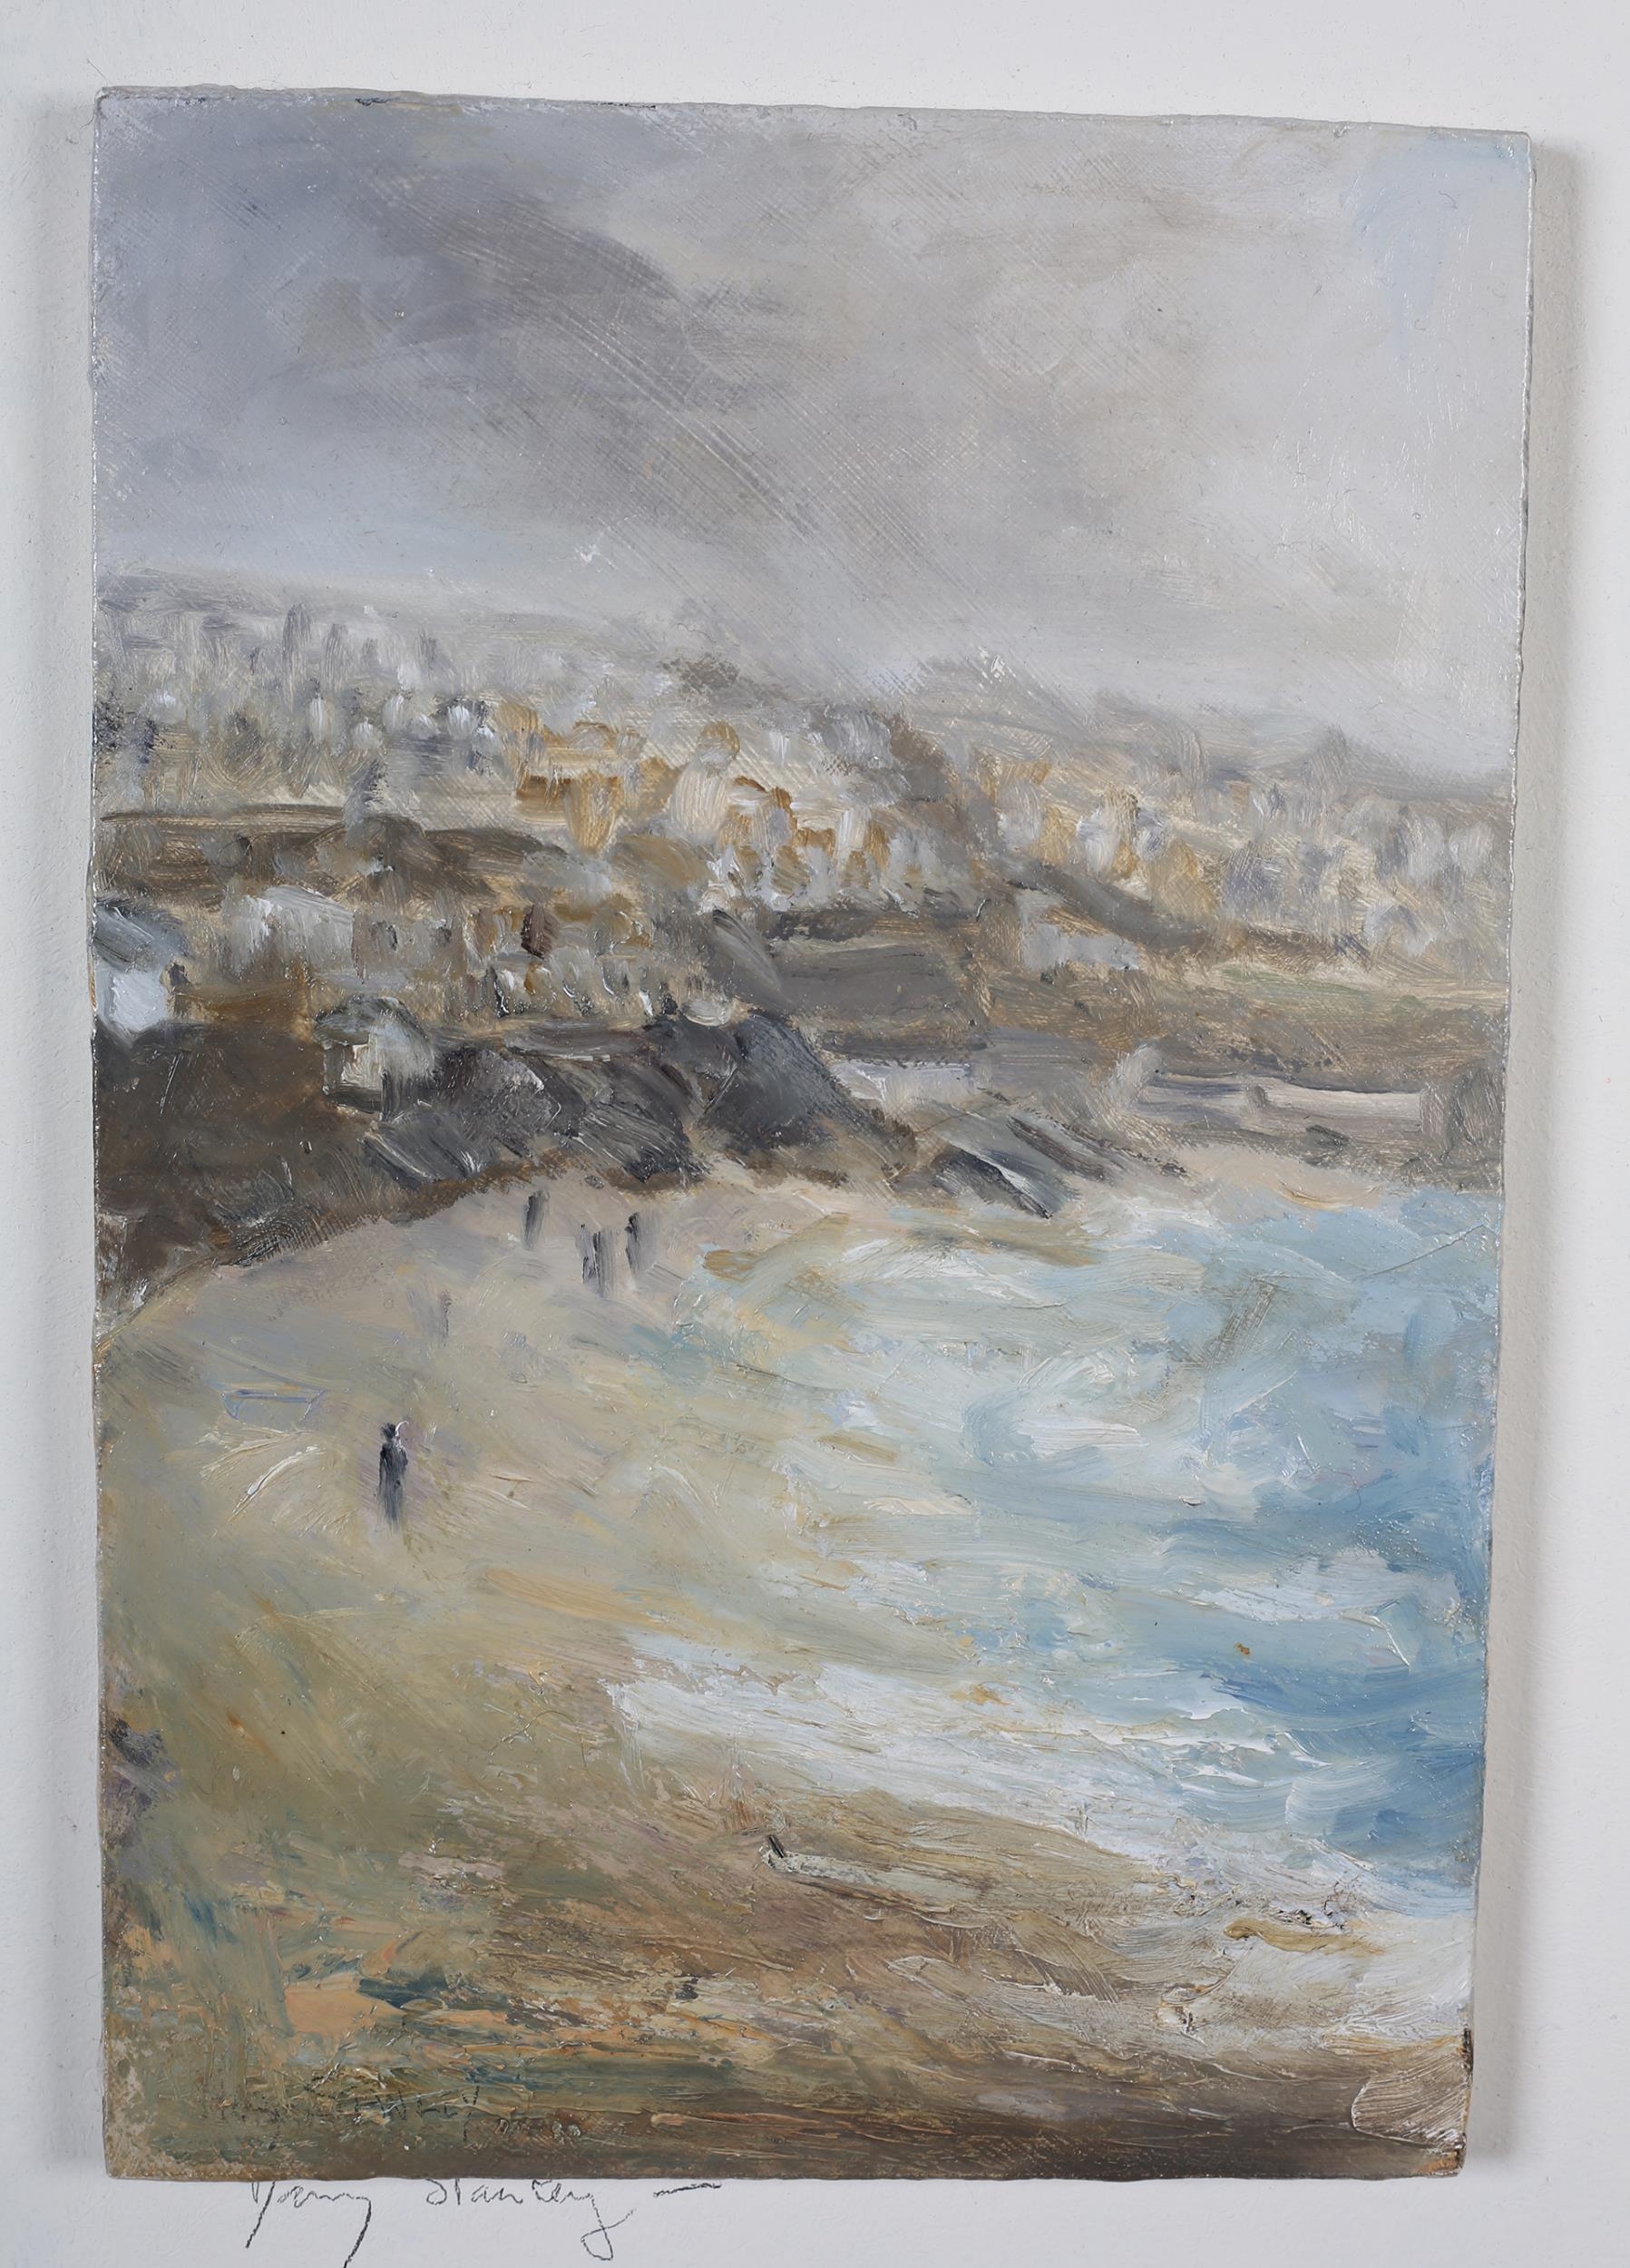 ARR David Stanley (b.1946), Porthmeor Beach Late Afternoon, oil on board, signed, dated 2007 and